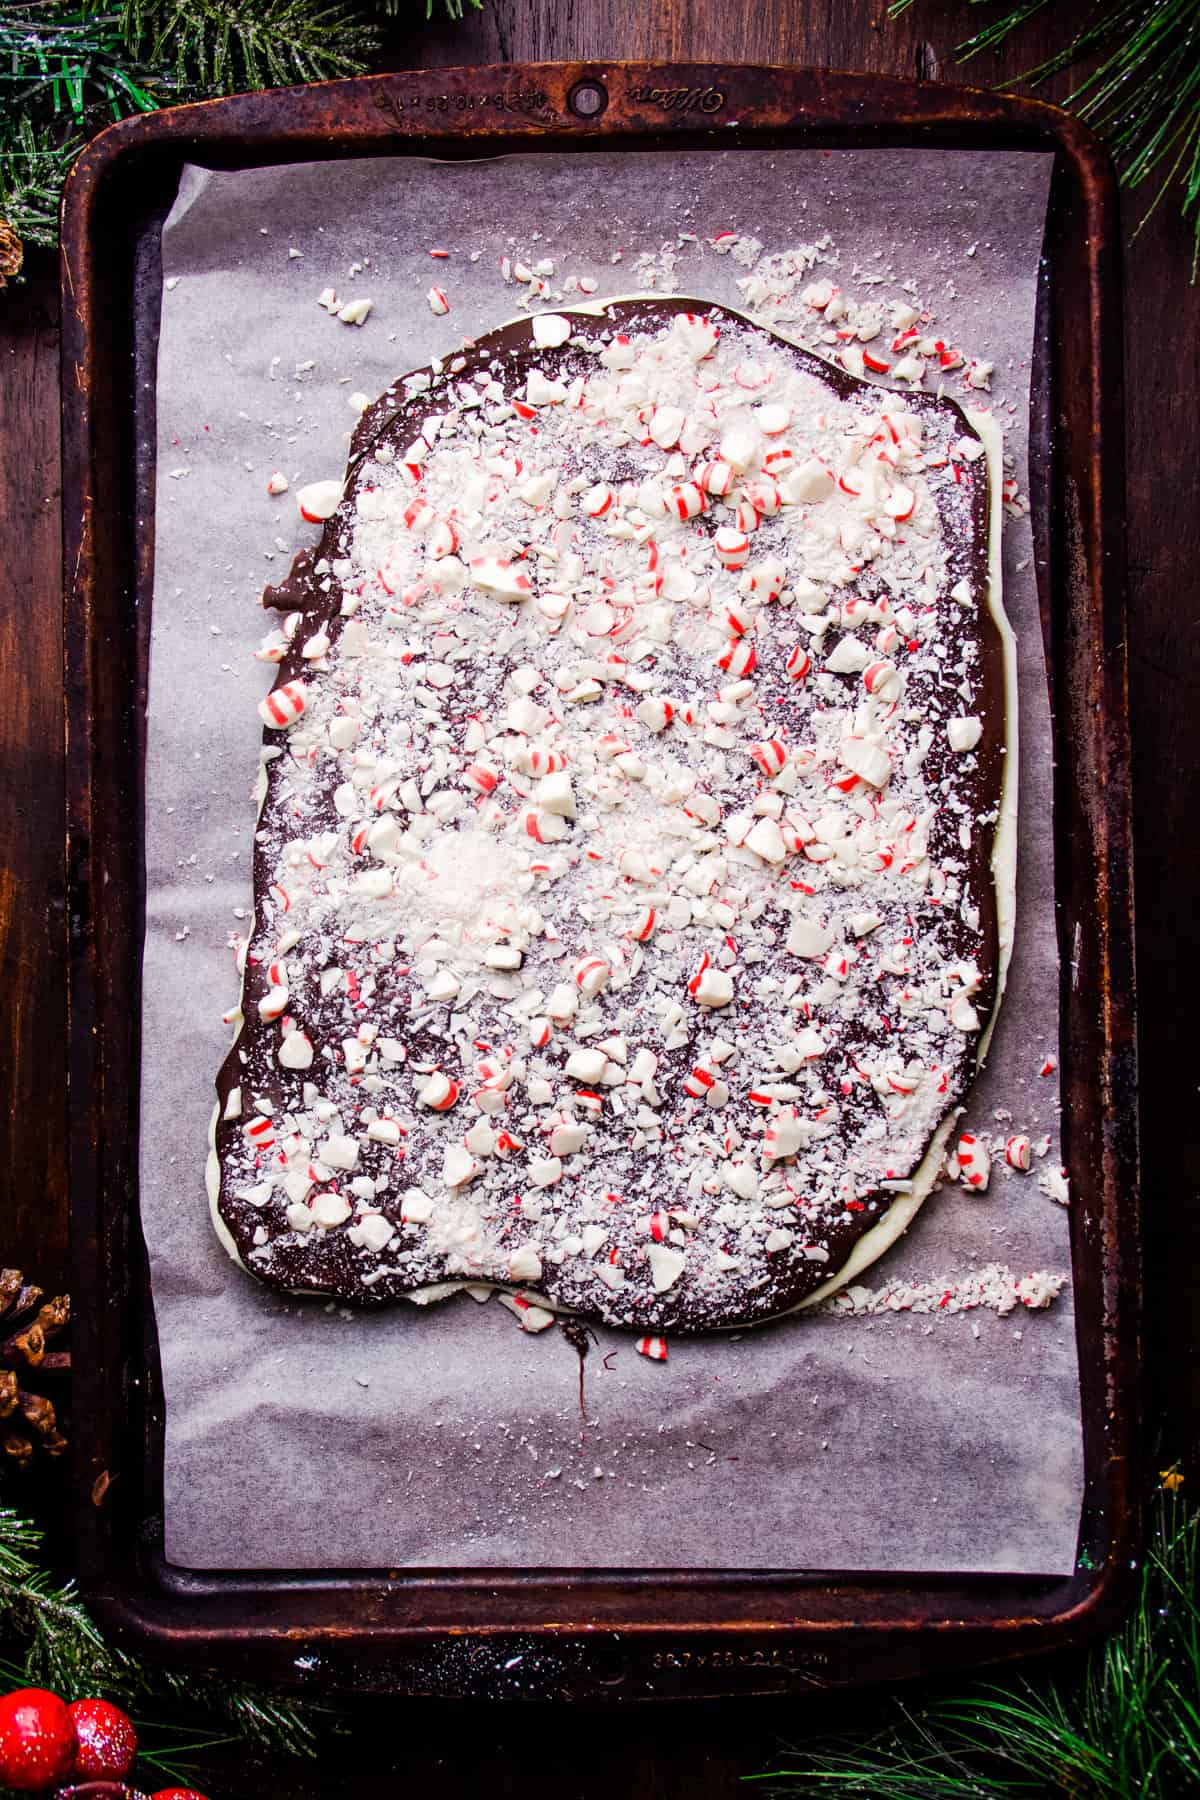 finished peppermint chocolate bark on a baking sheet